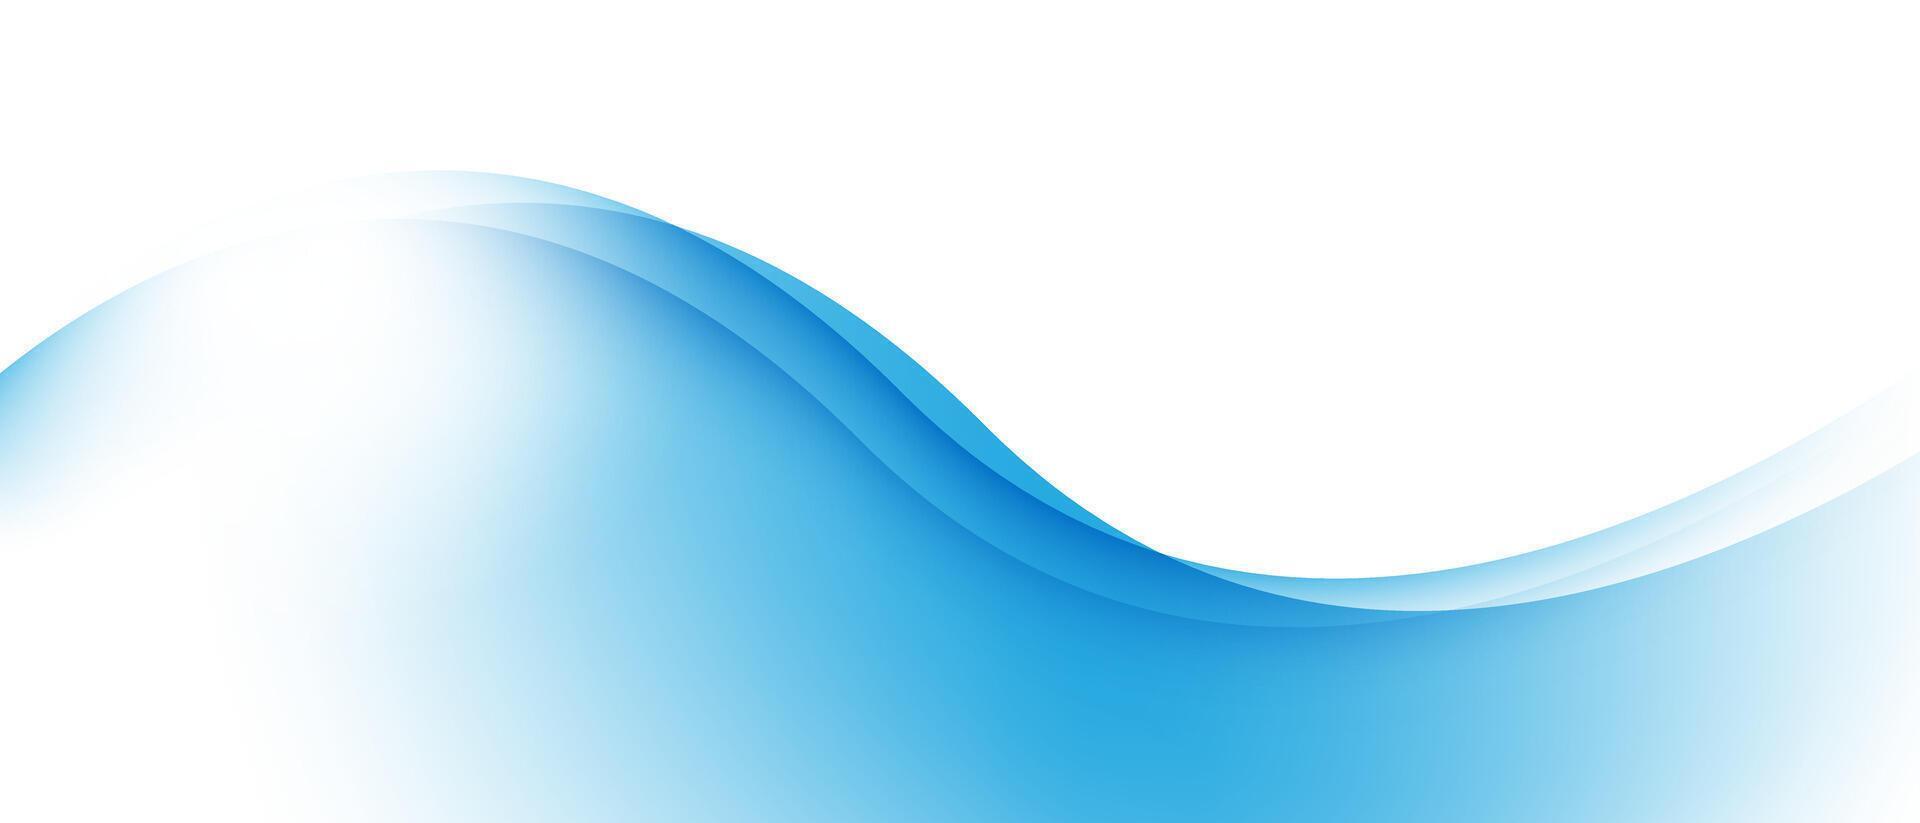 abstract blue wave background modern vector illustration